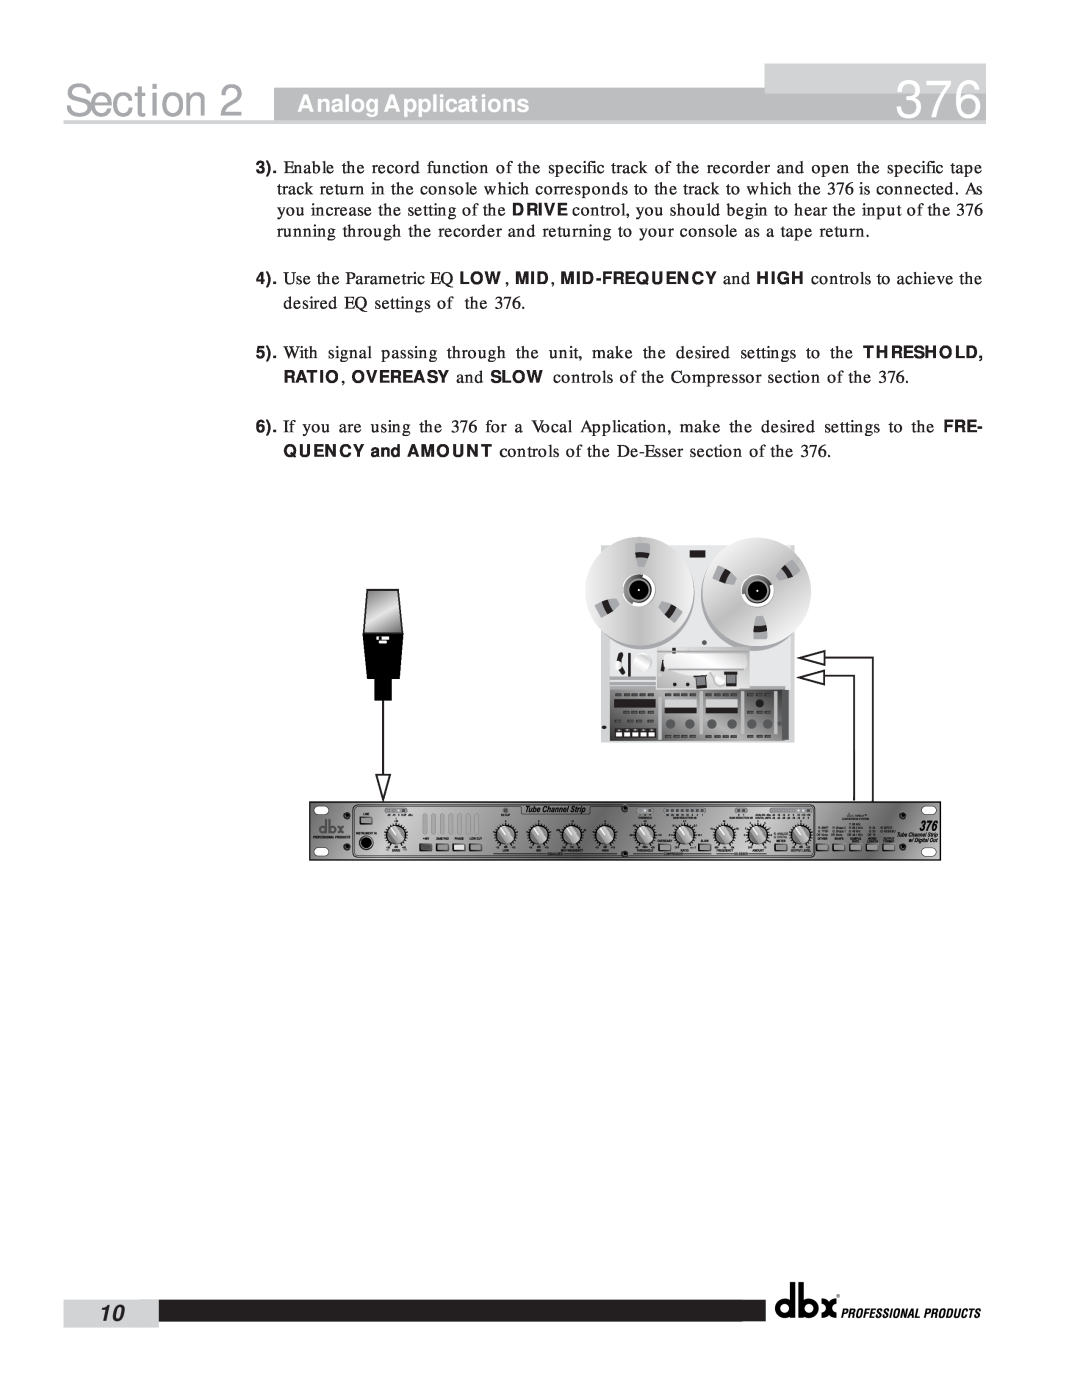 dbx Pro 376 user manual Section, Analog Applications 